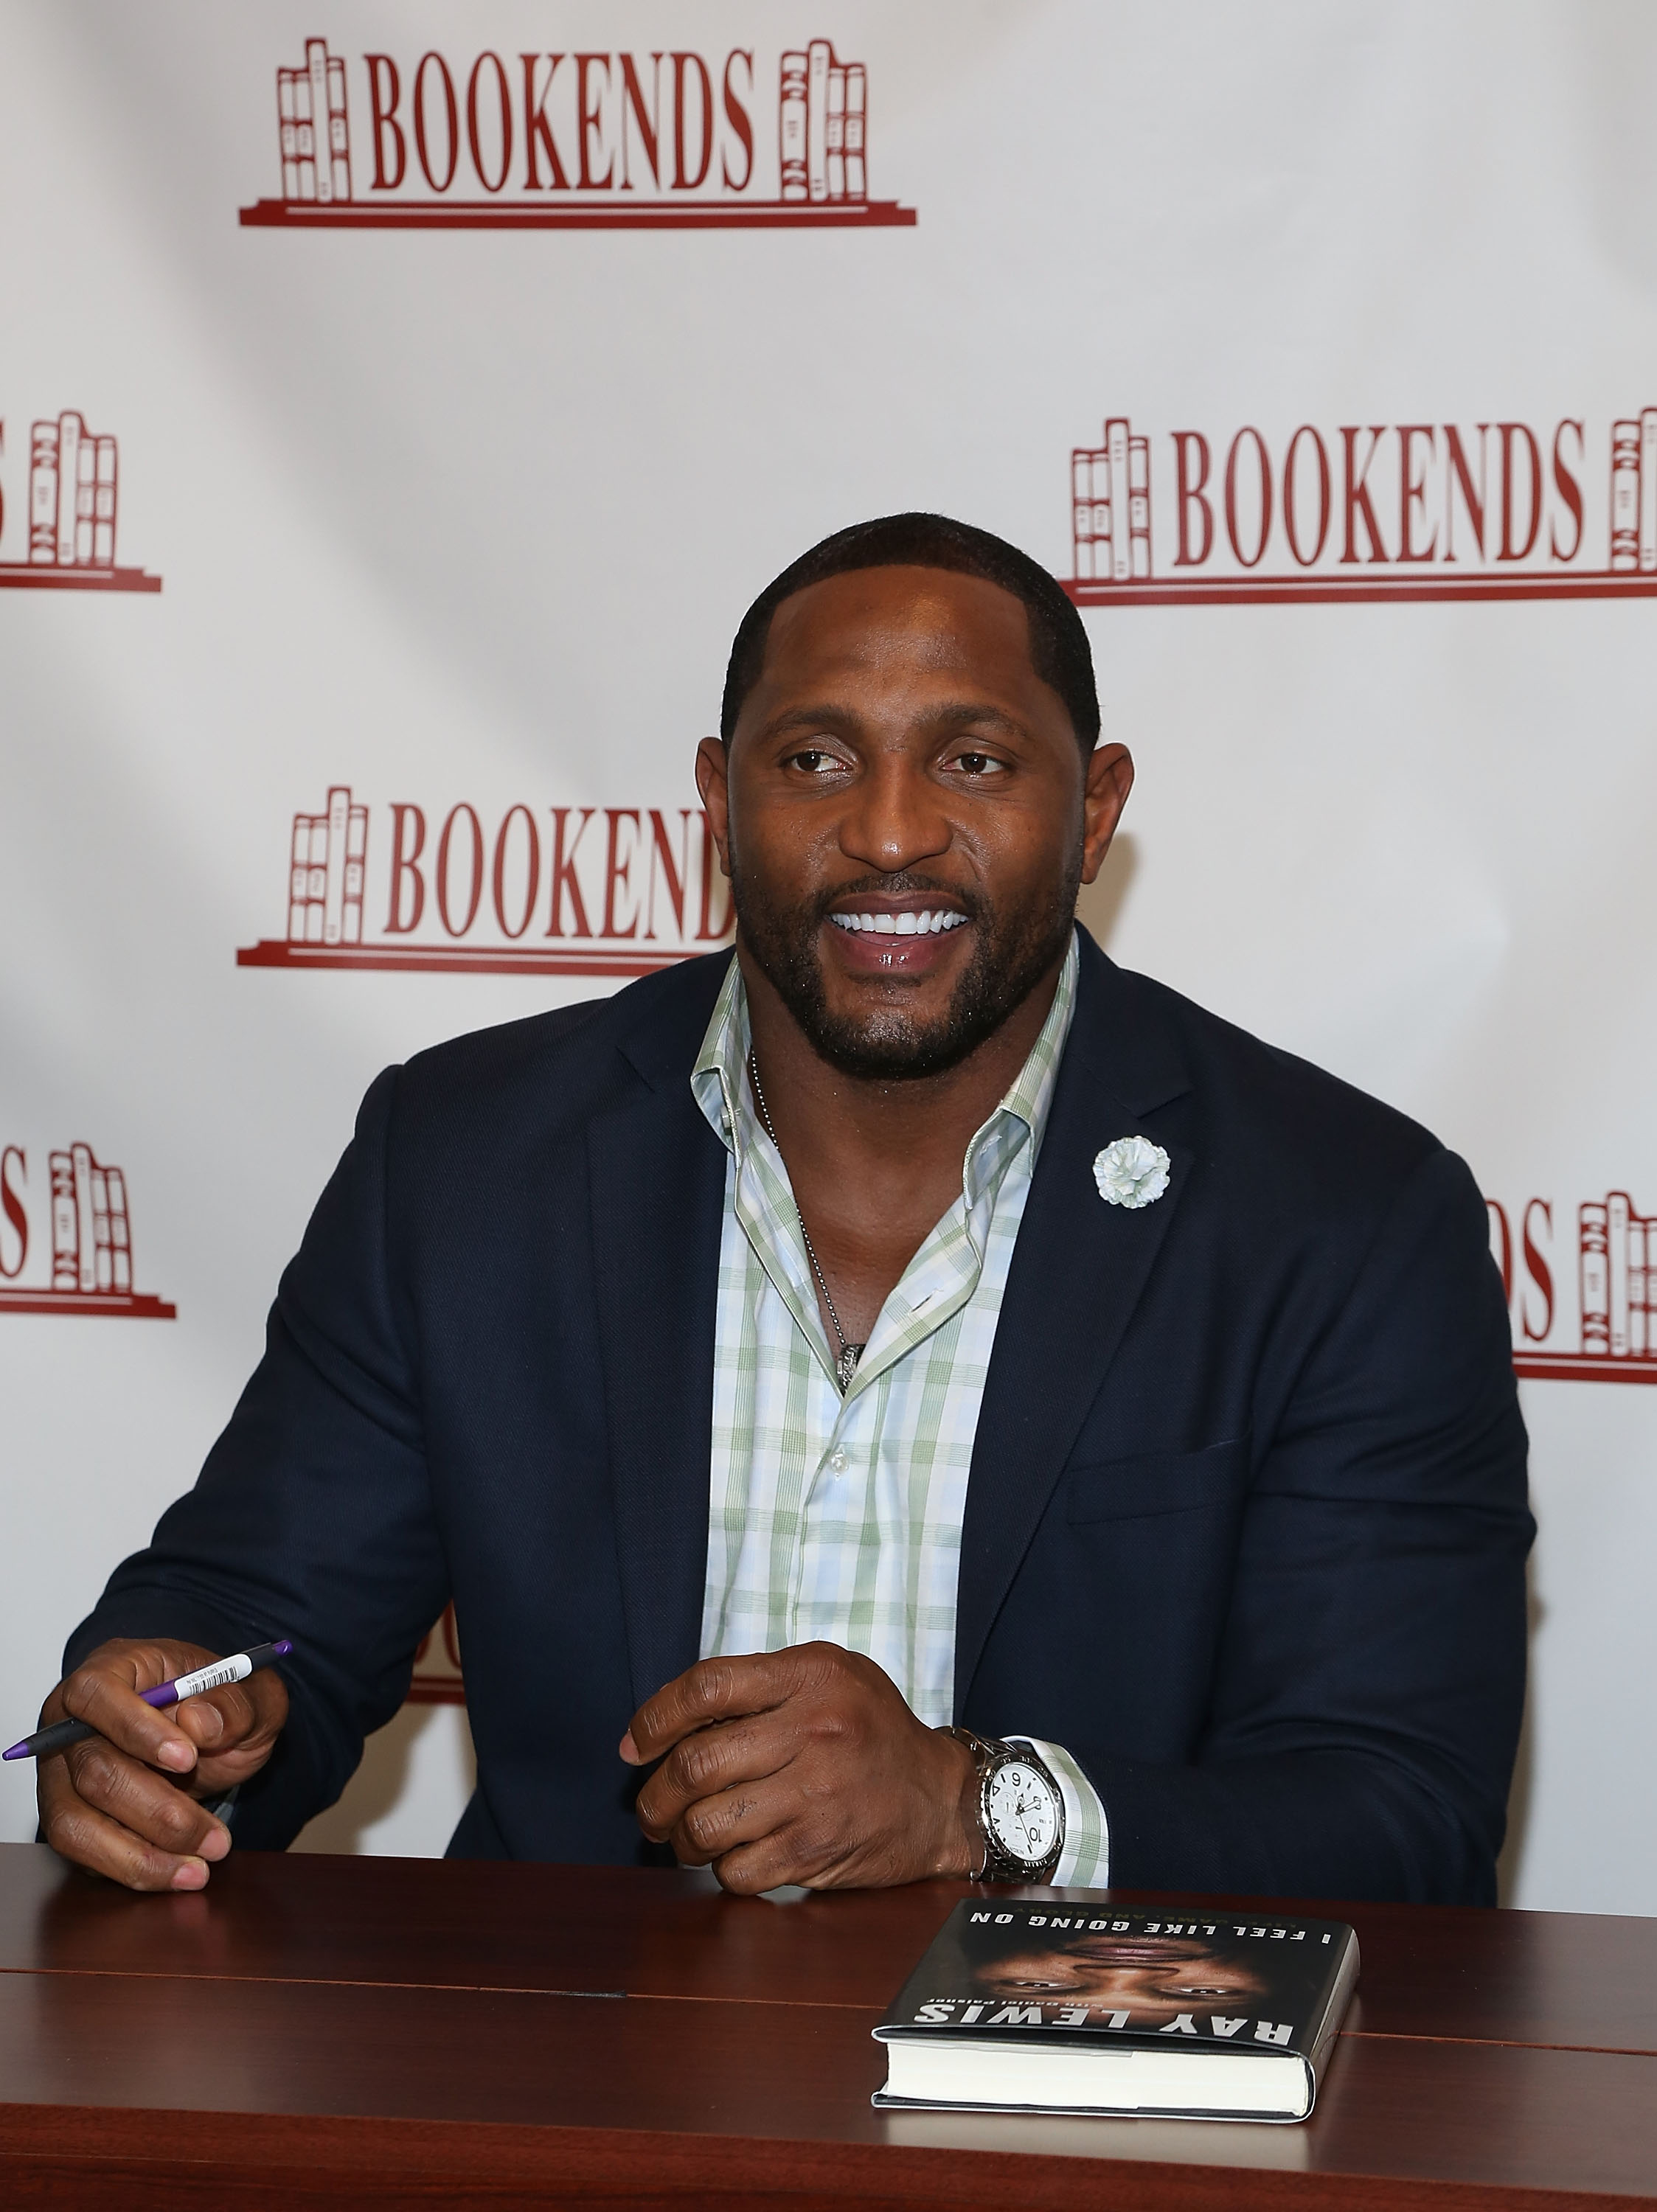 Ray Lewis Signs Copies Of His New Book "I Feel Like Going On"